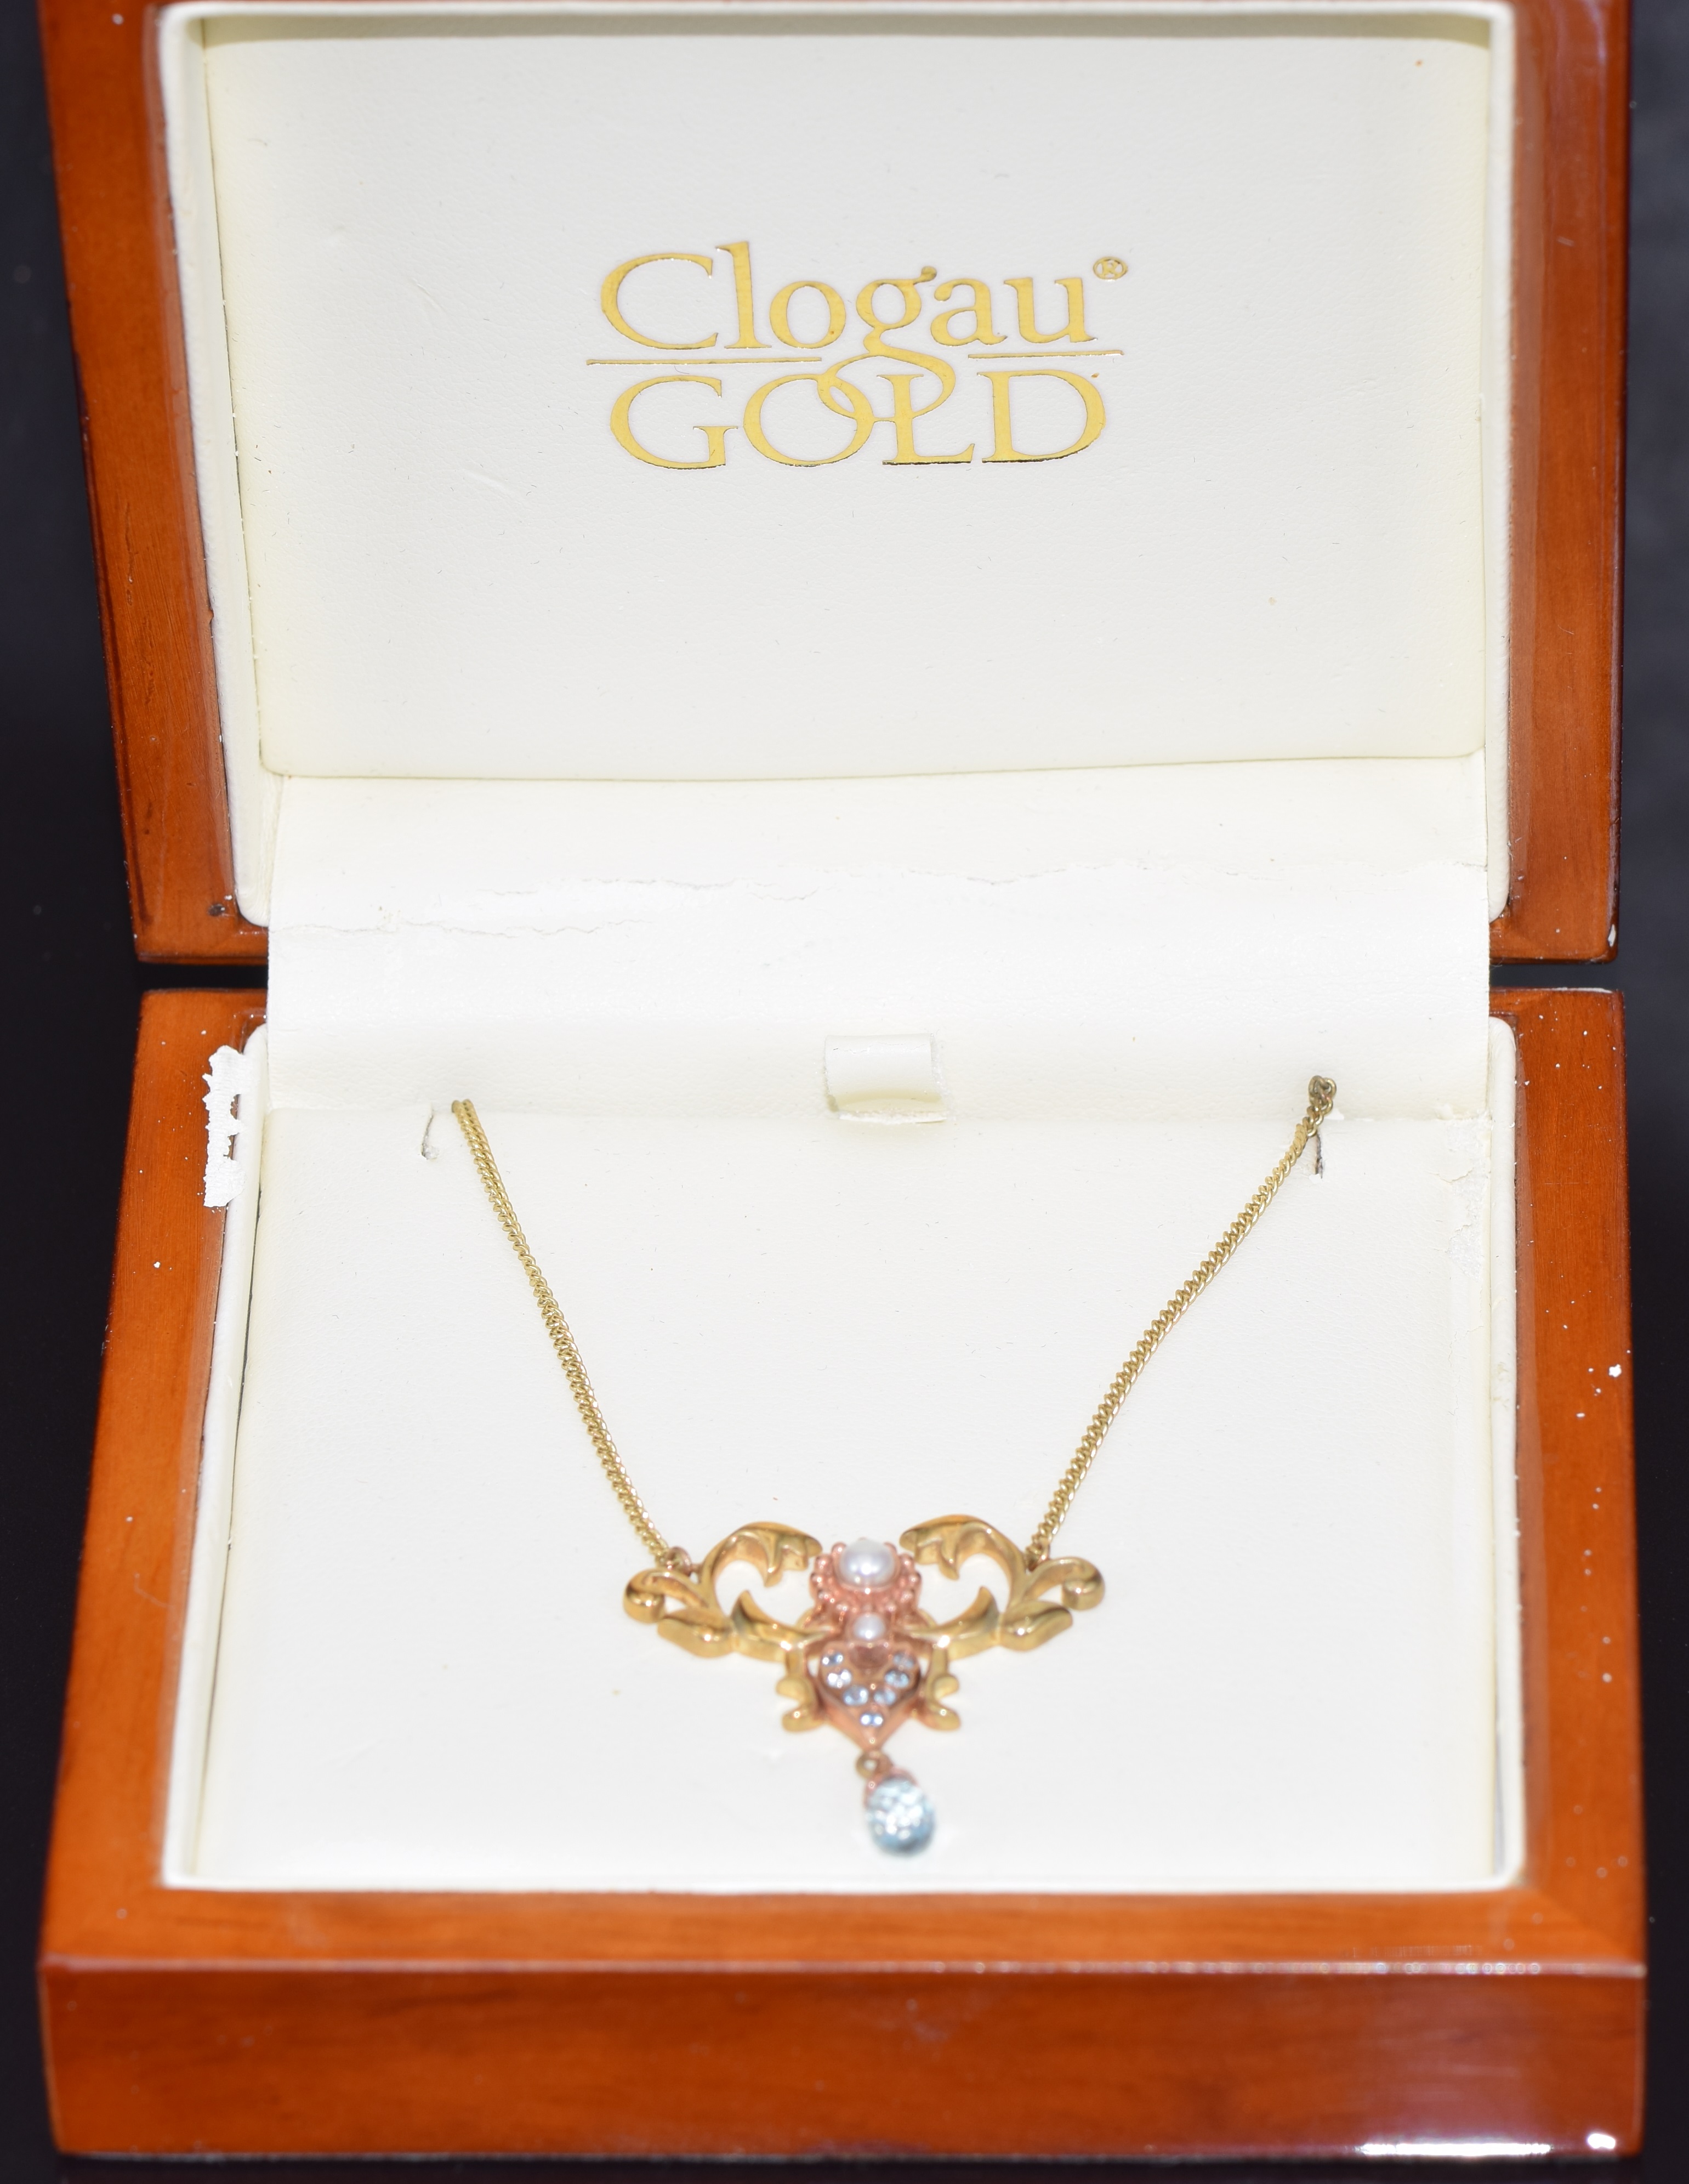 Clogau 9ct gold necklace set with pearls and aquamarines, in original box, 7.4g - Image 2 of 2